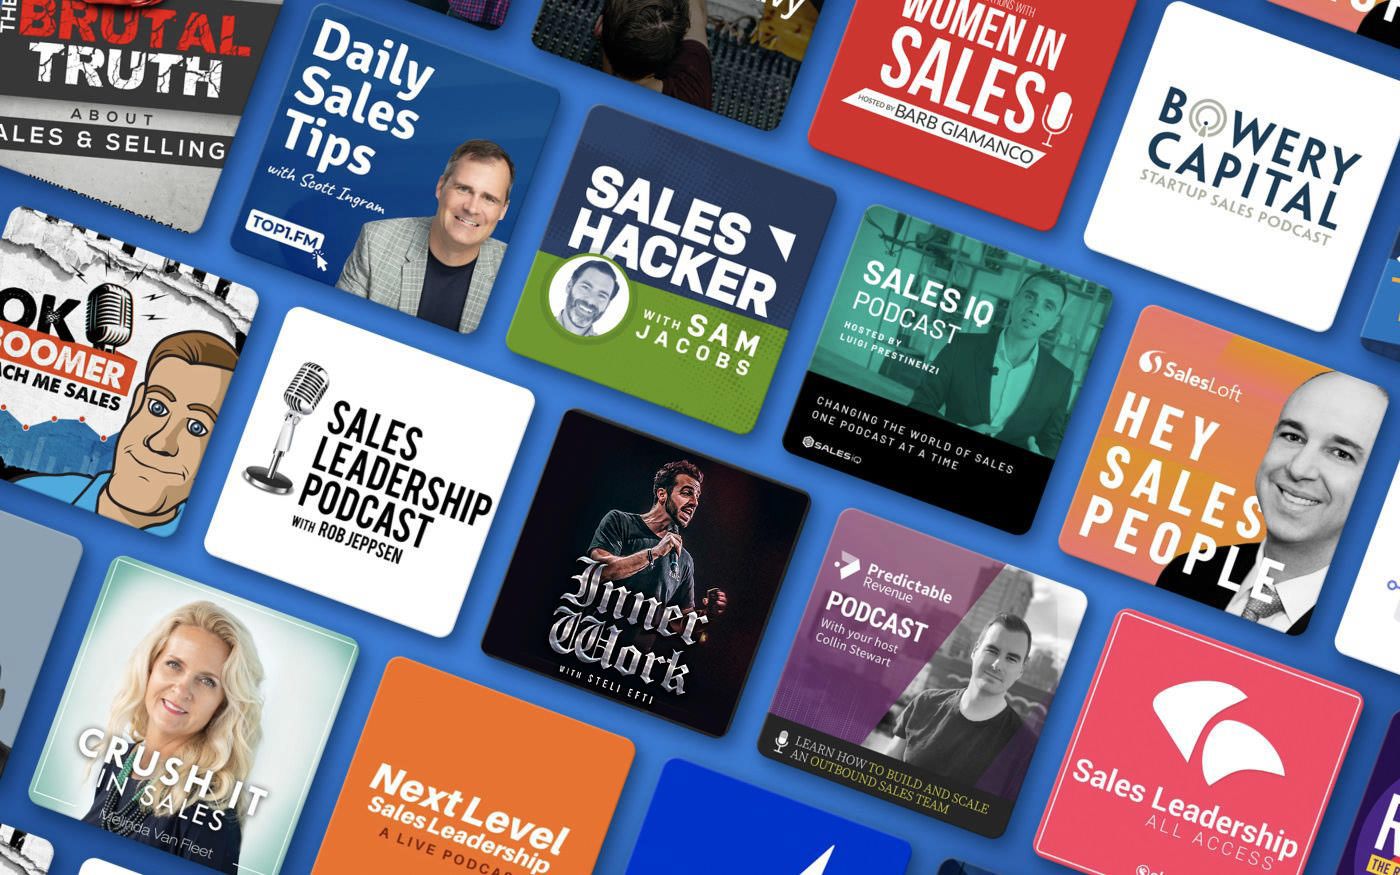 How to Be a Good Salesperson: The Best Podcasts for Sales